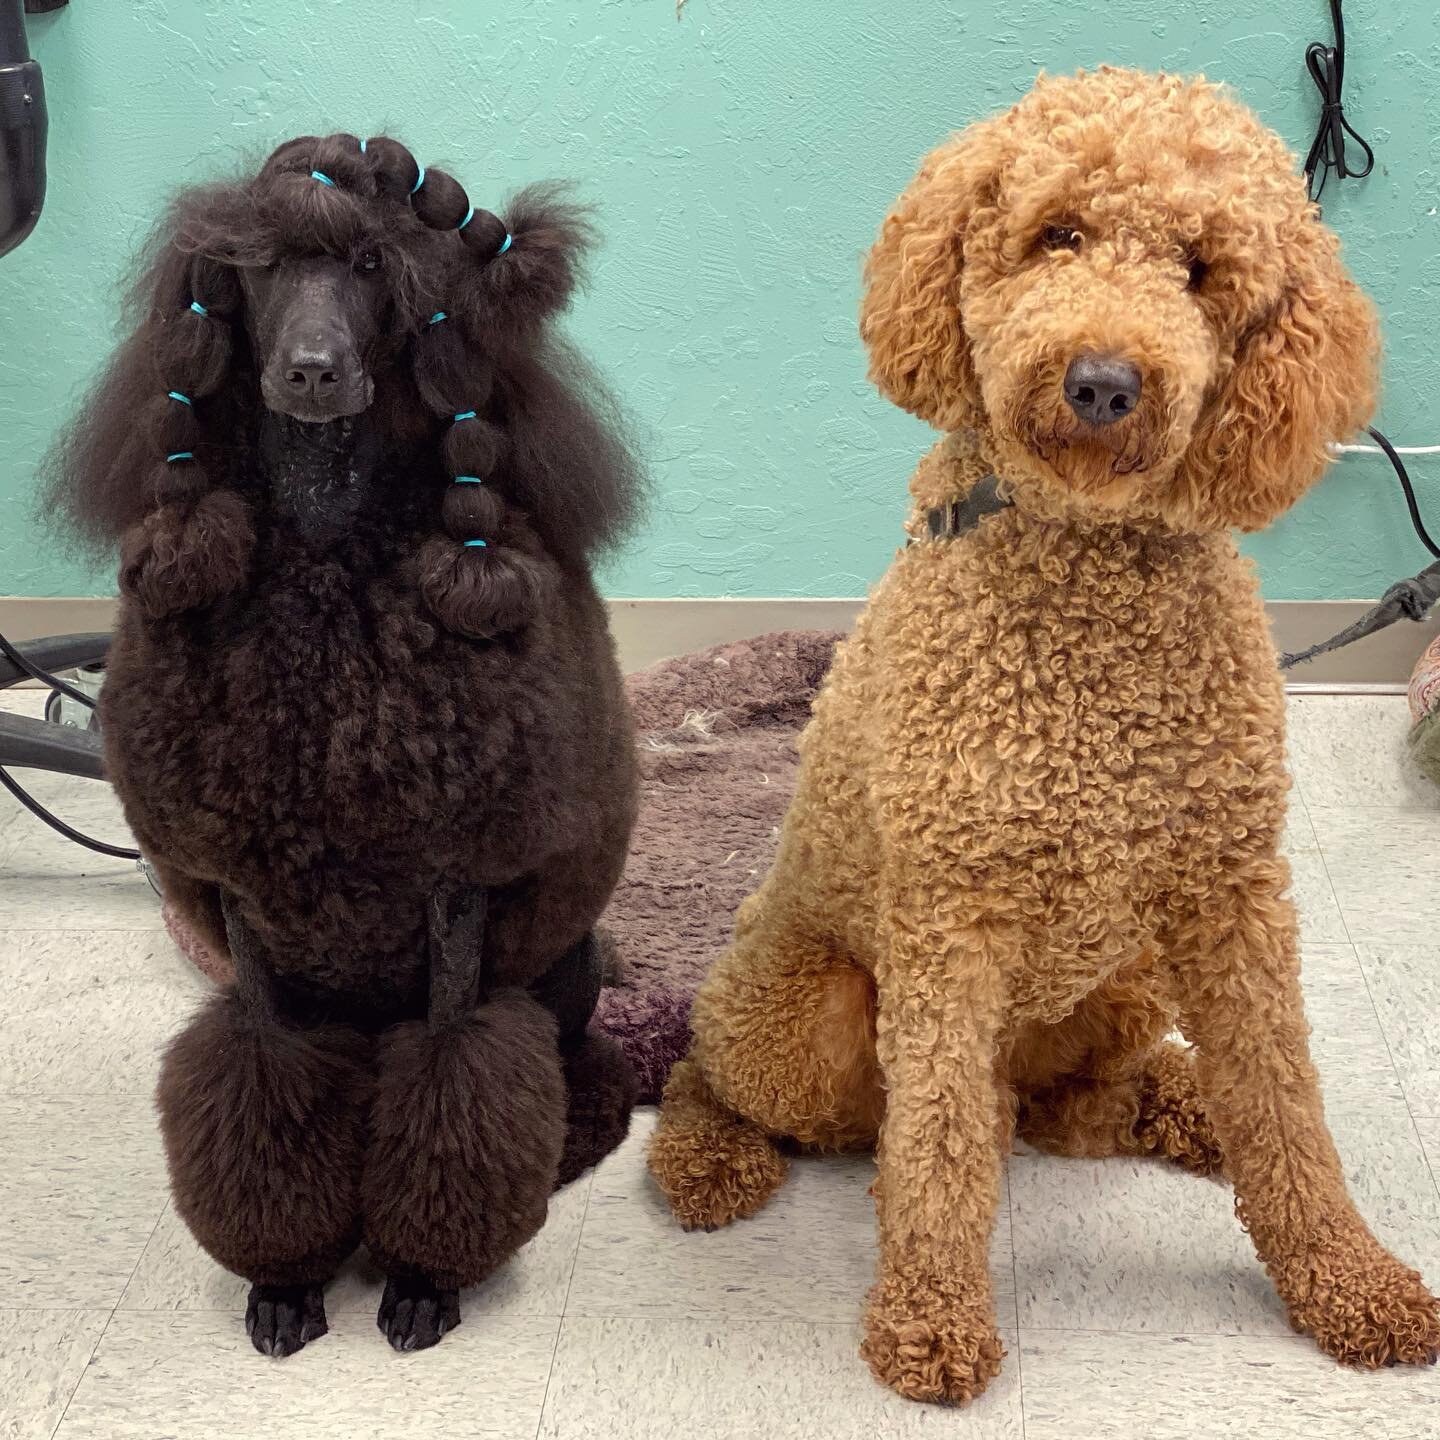 Can you guess which one is the poodle?
Trick question, they both are! 
Shop dog Juniper is actively showing in AKC conformation, so she sports the traditional Continental trim. Kirby prefers a simple field clip with a short teddy bear head for easy m